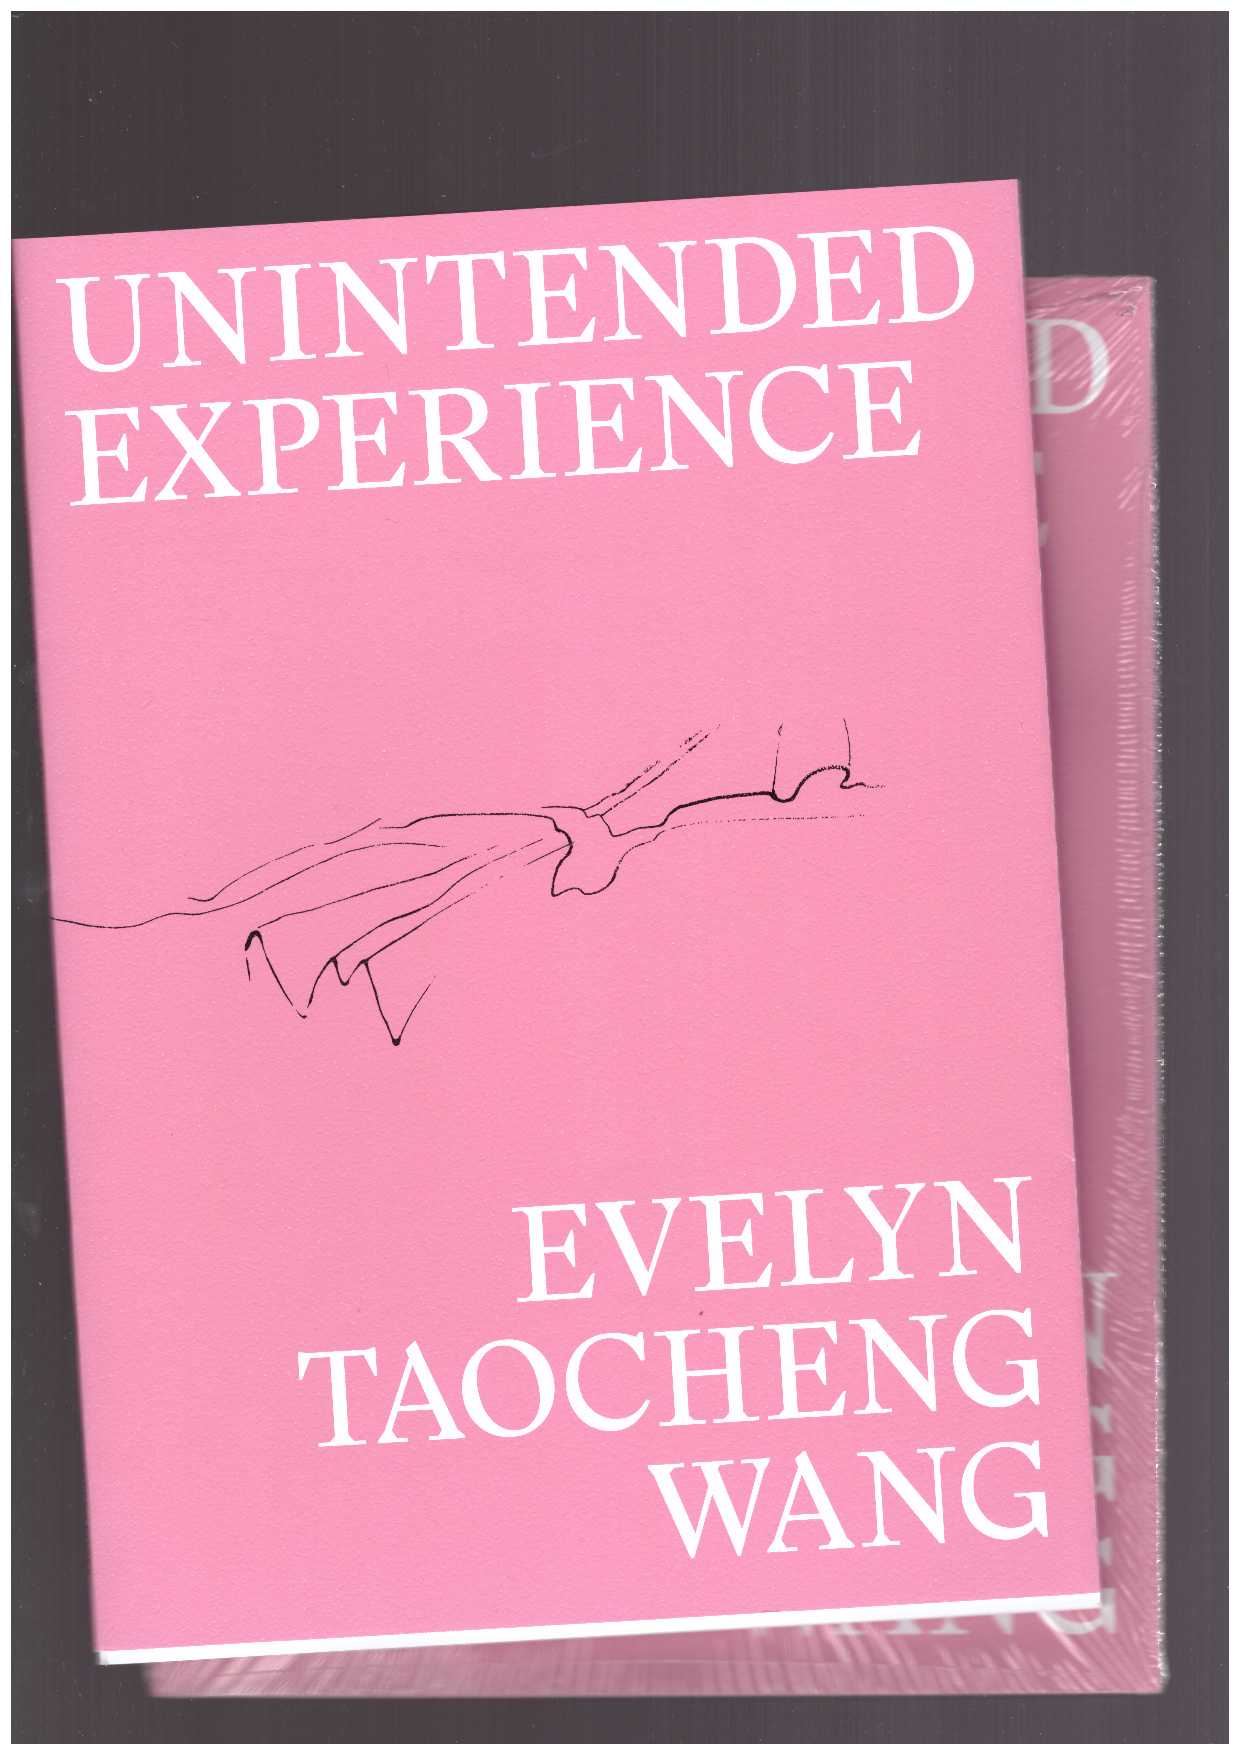 WANG, Evelyn Taocheng - Unintended Experience. A Job in Amsterdam (reprint)